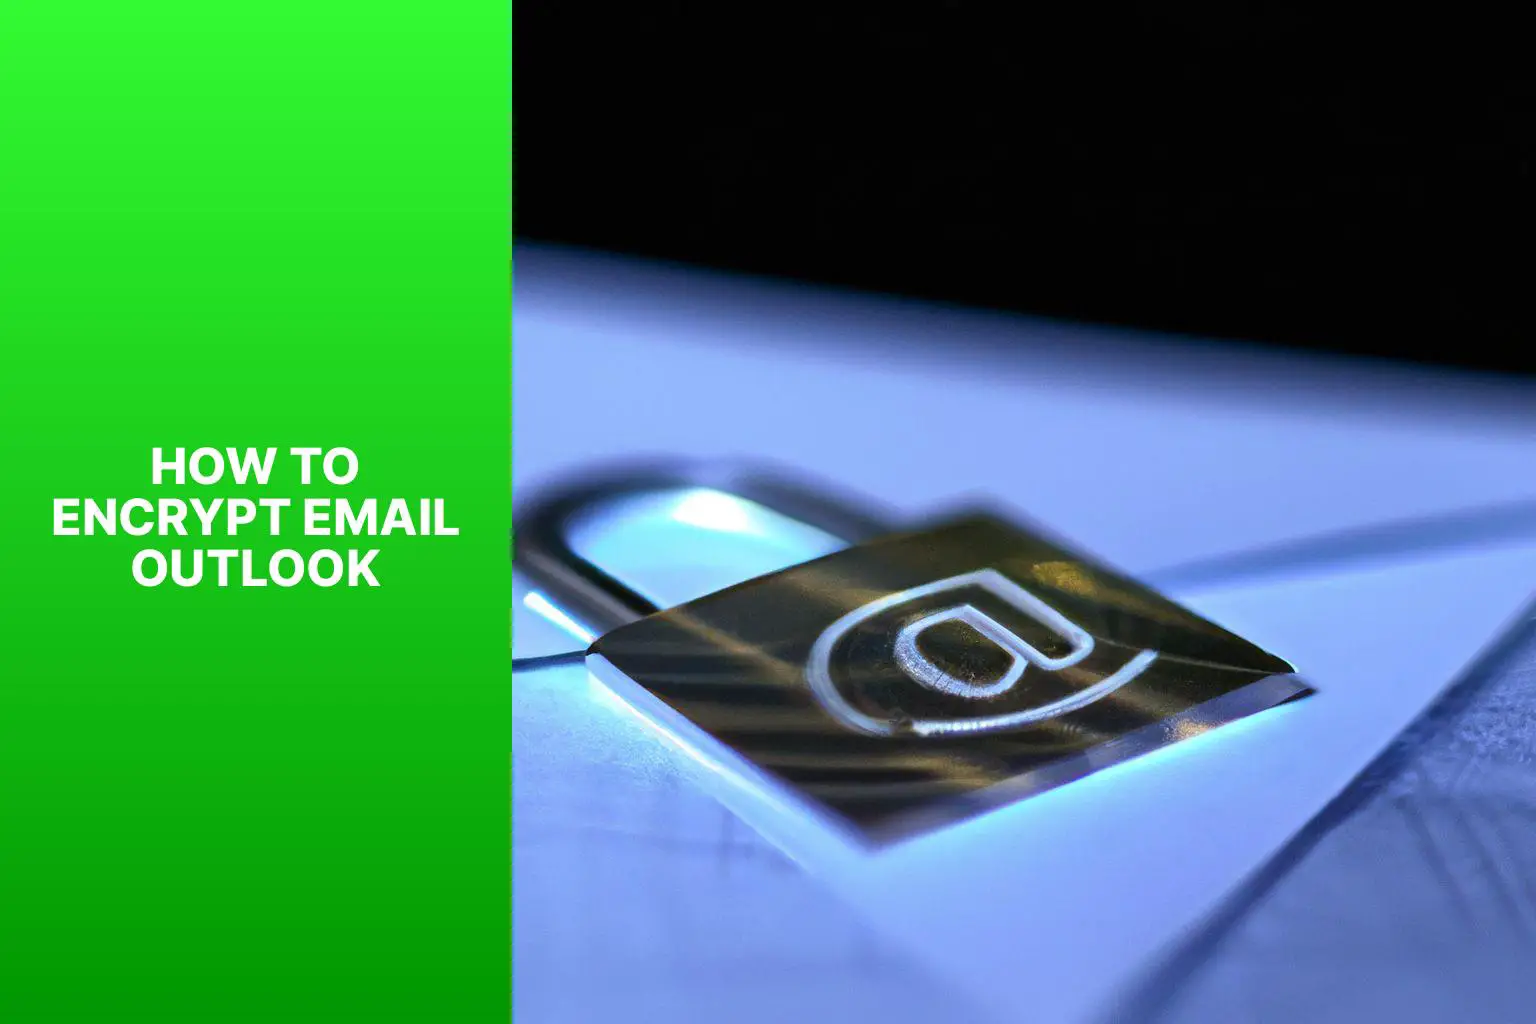 Learn How to Encrypt Email in Outlook for Secure Communication